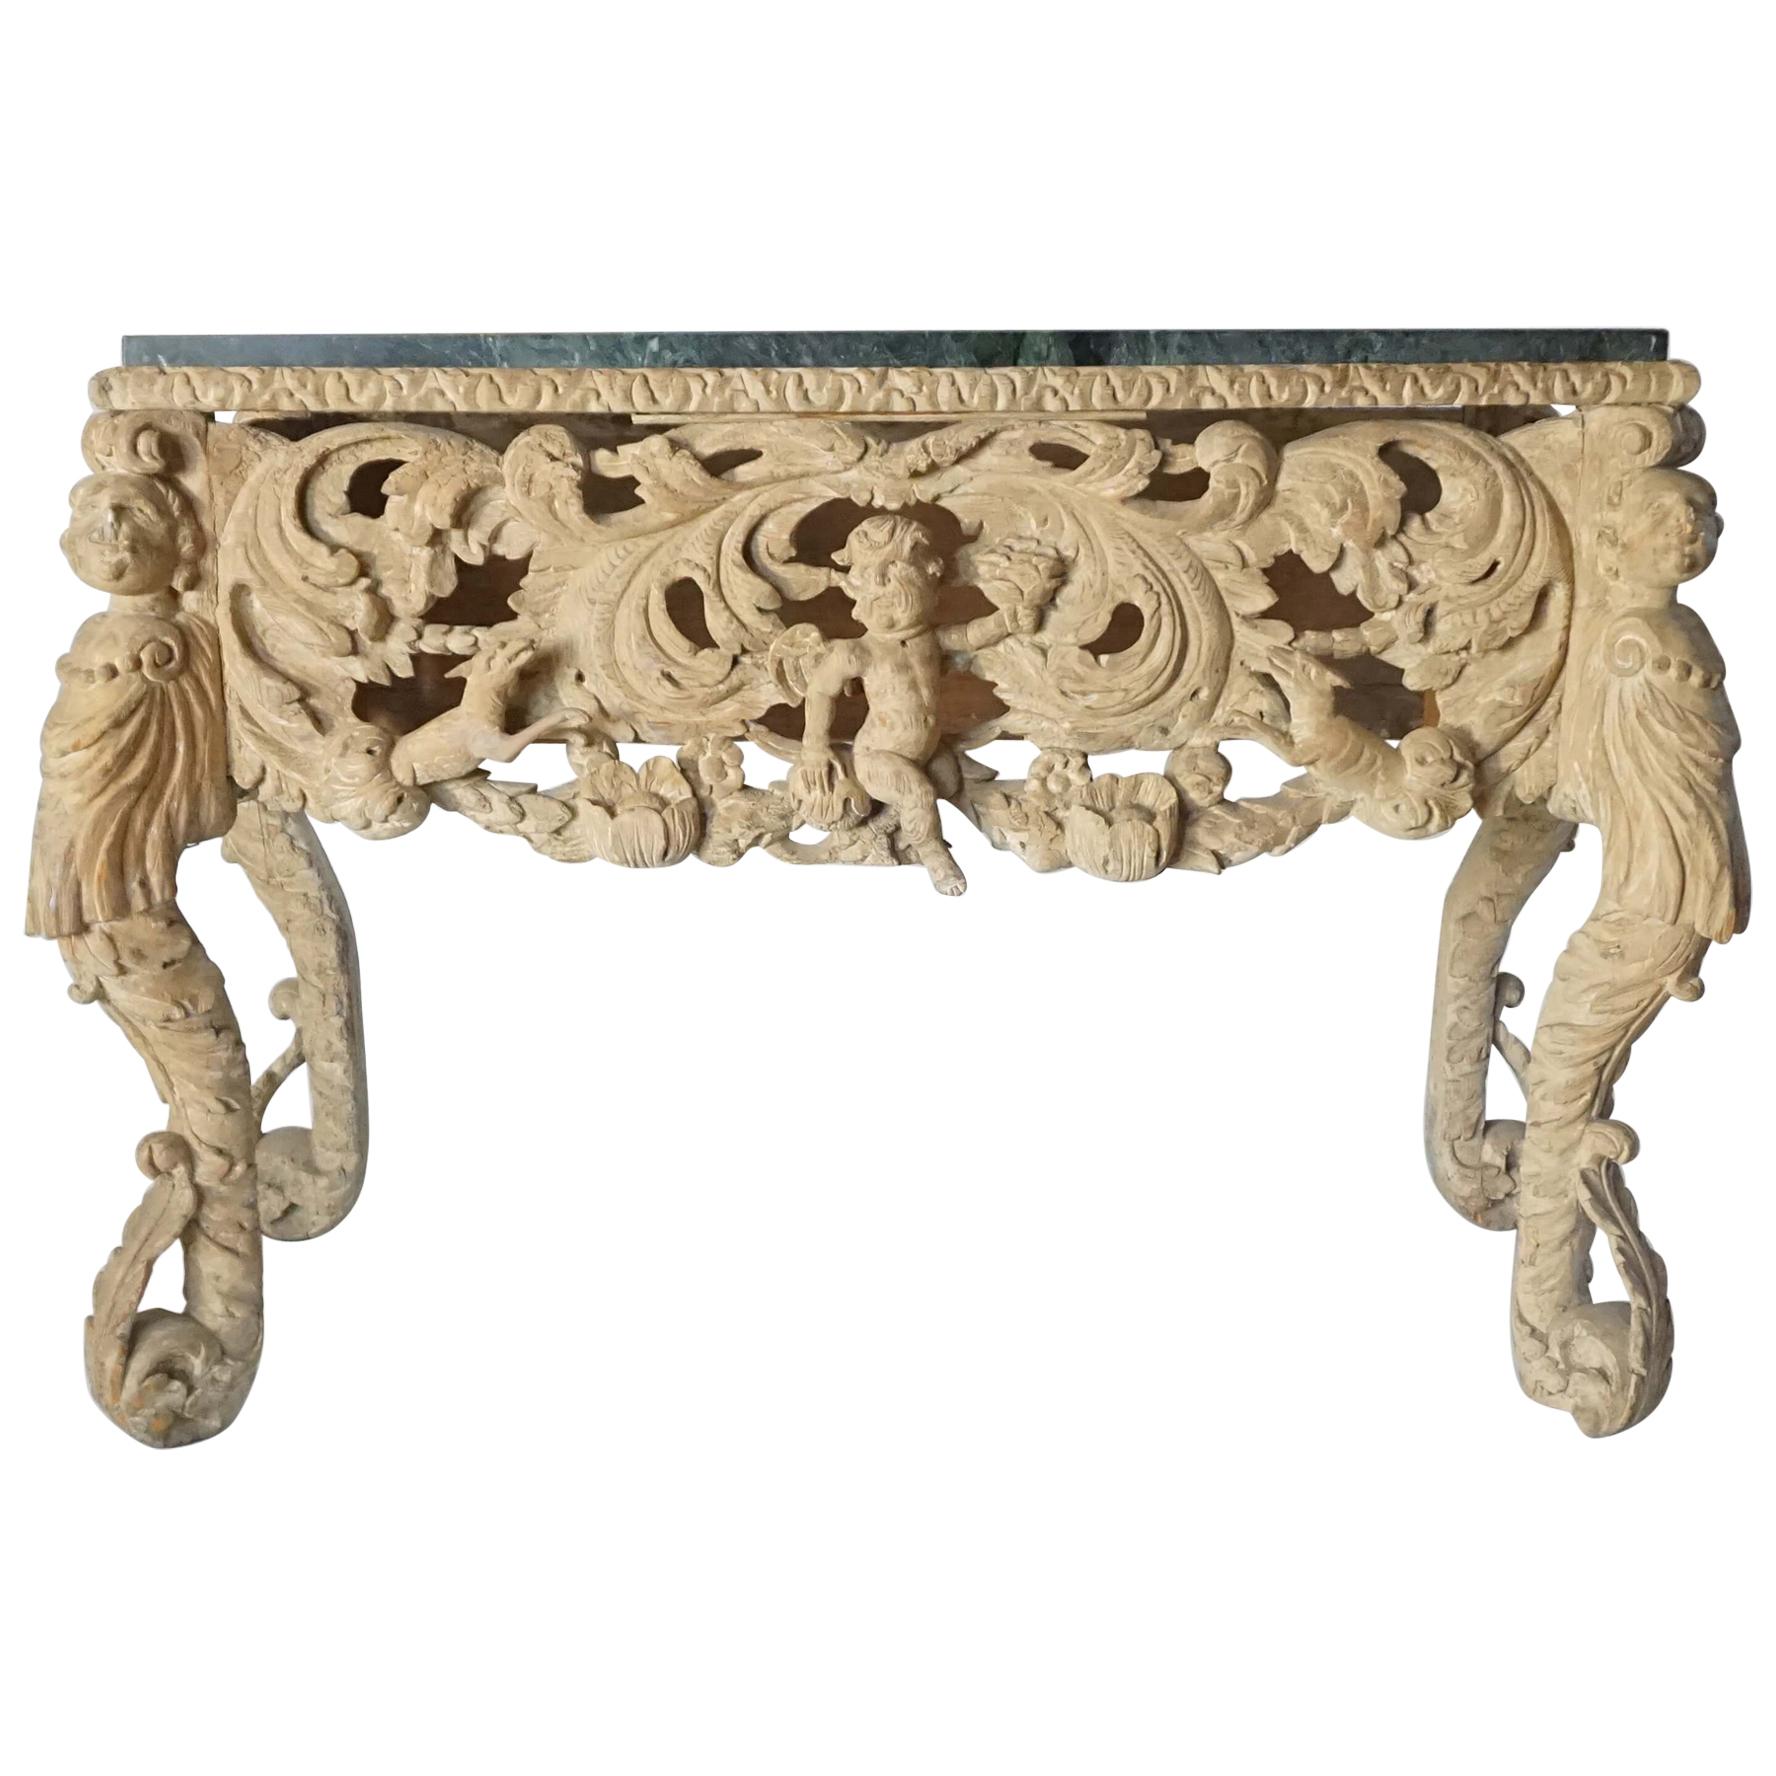 English Charles II Marble Top Console Table or Stand, circa 1660